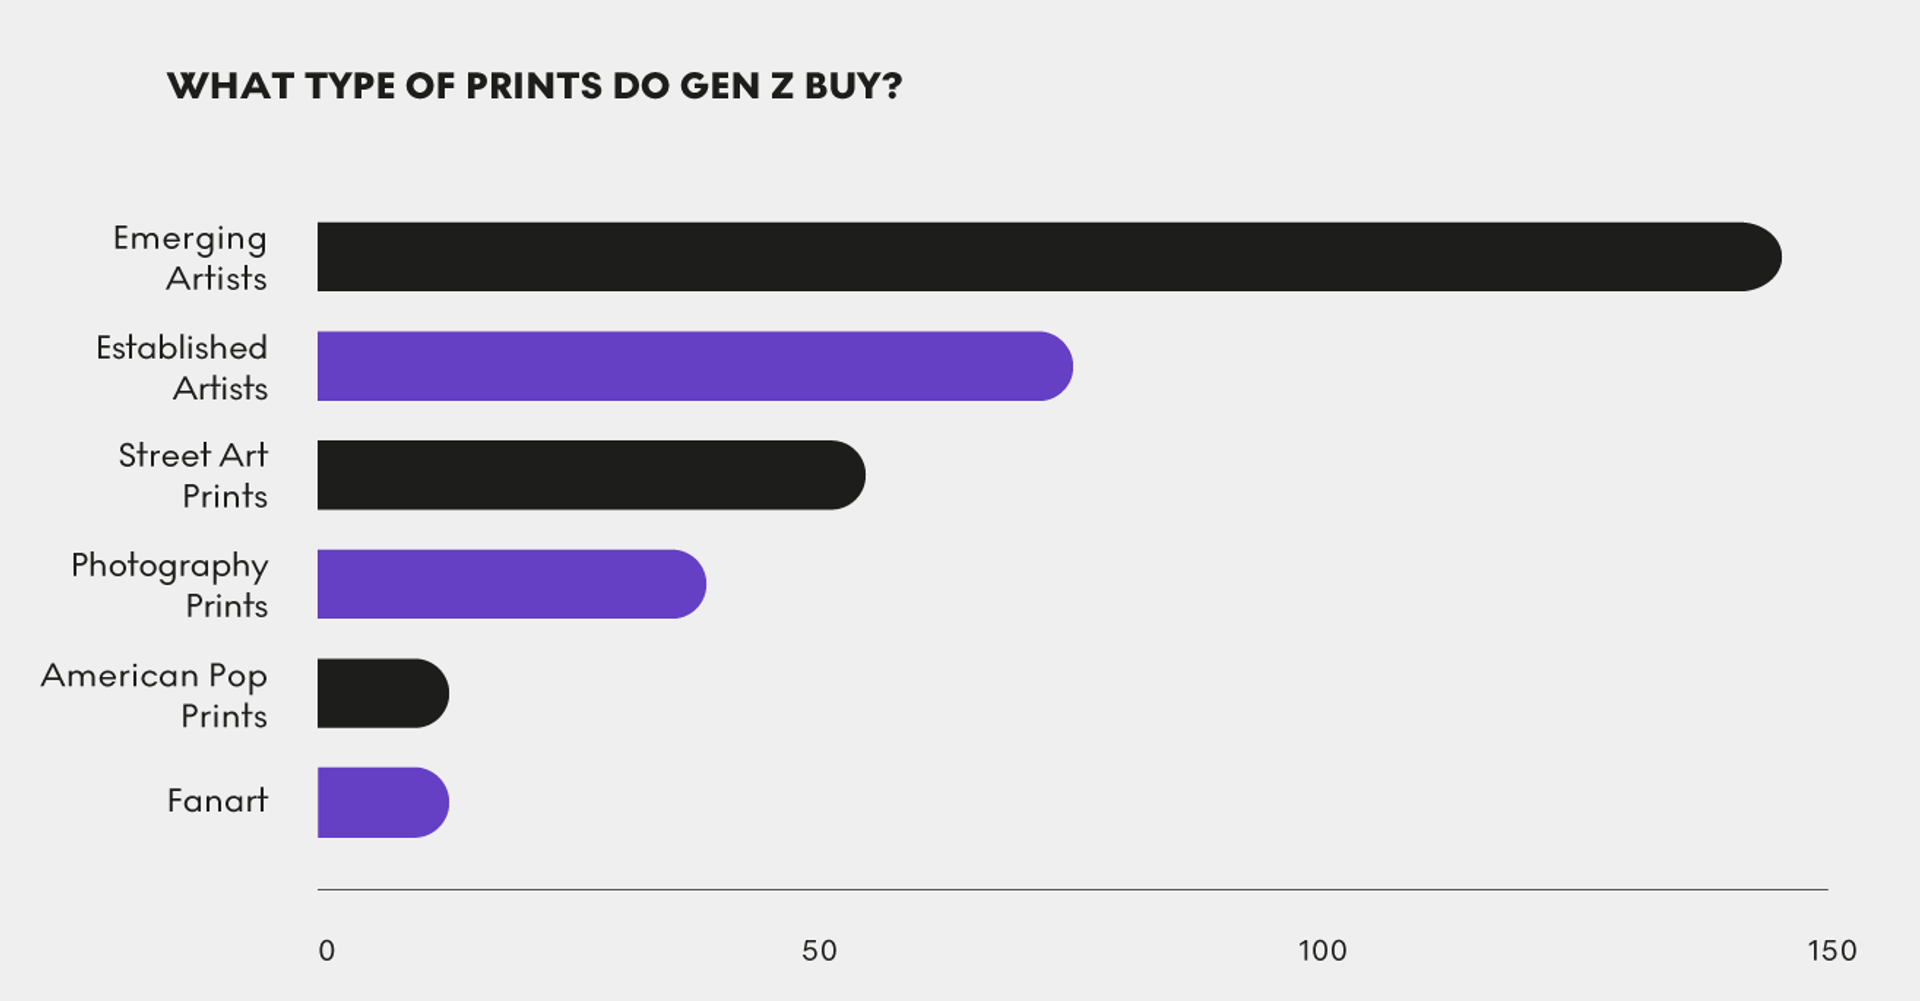 Graph showing the type of prints that Gen Z buy.